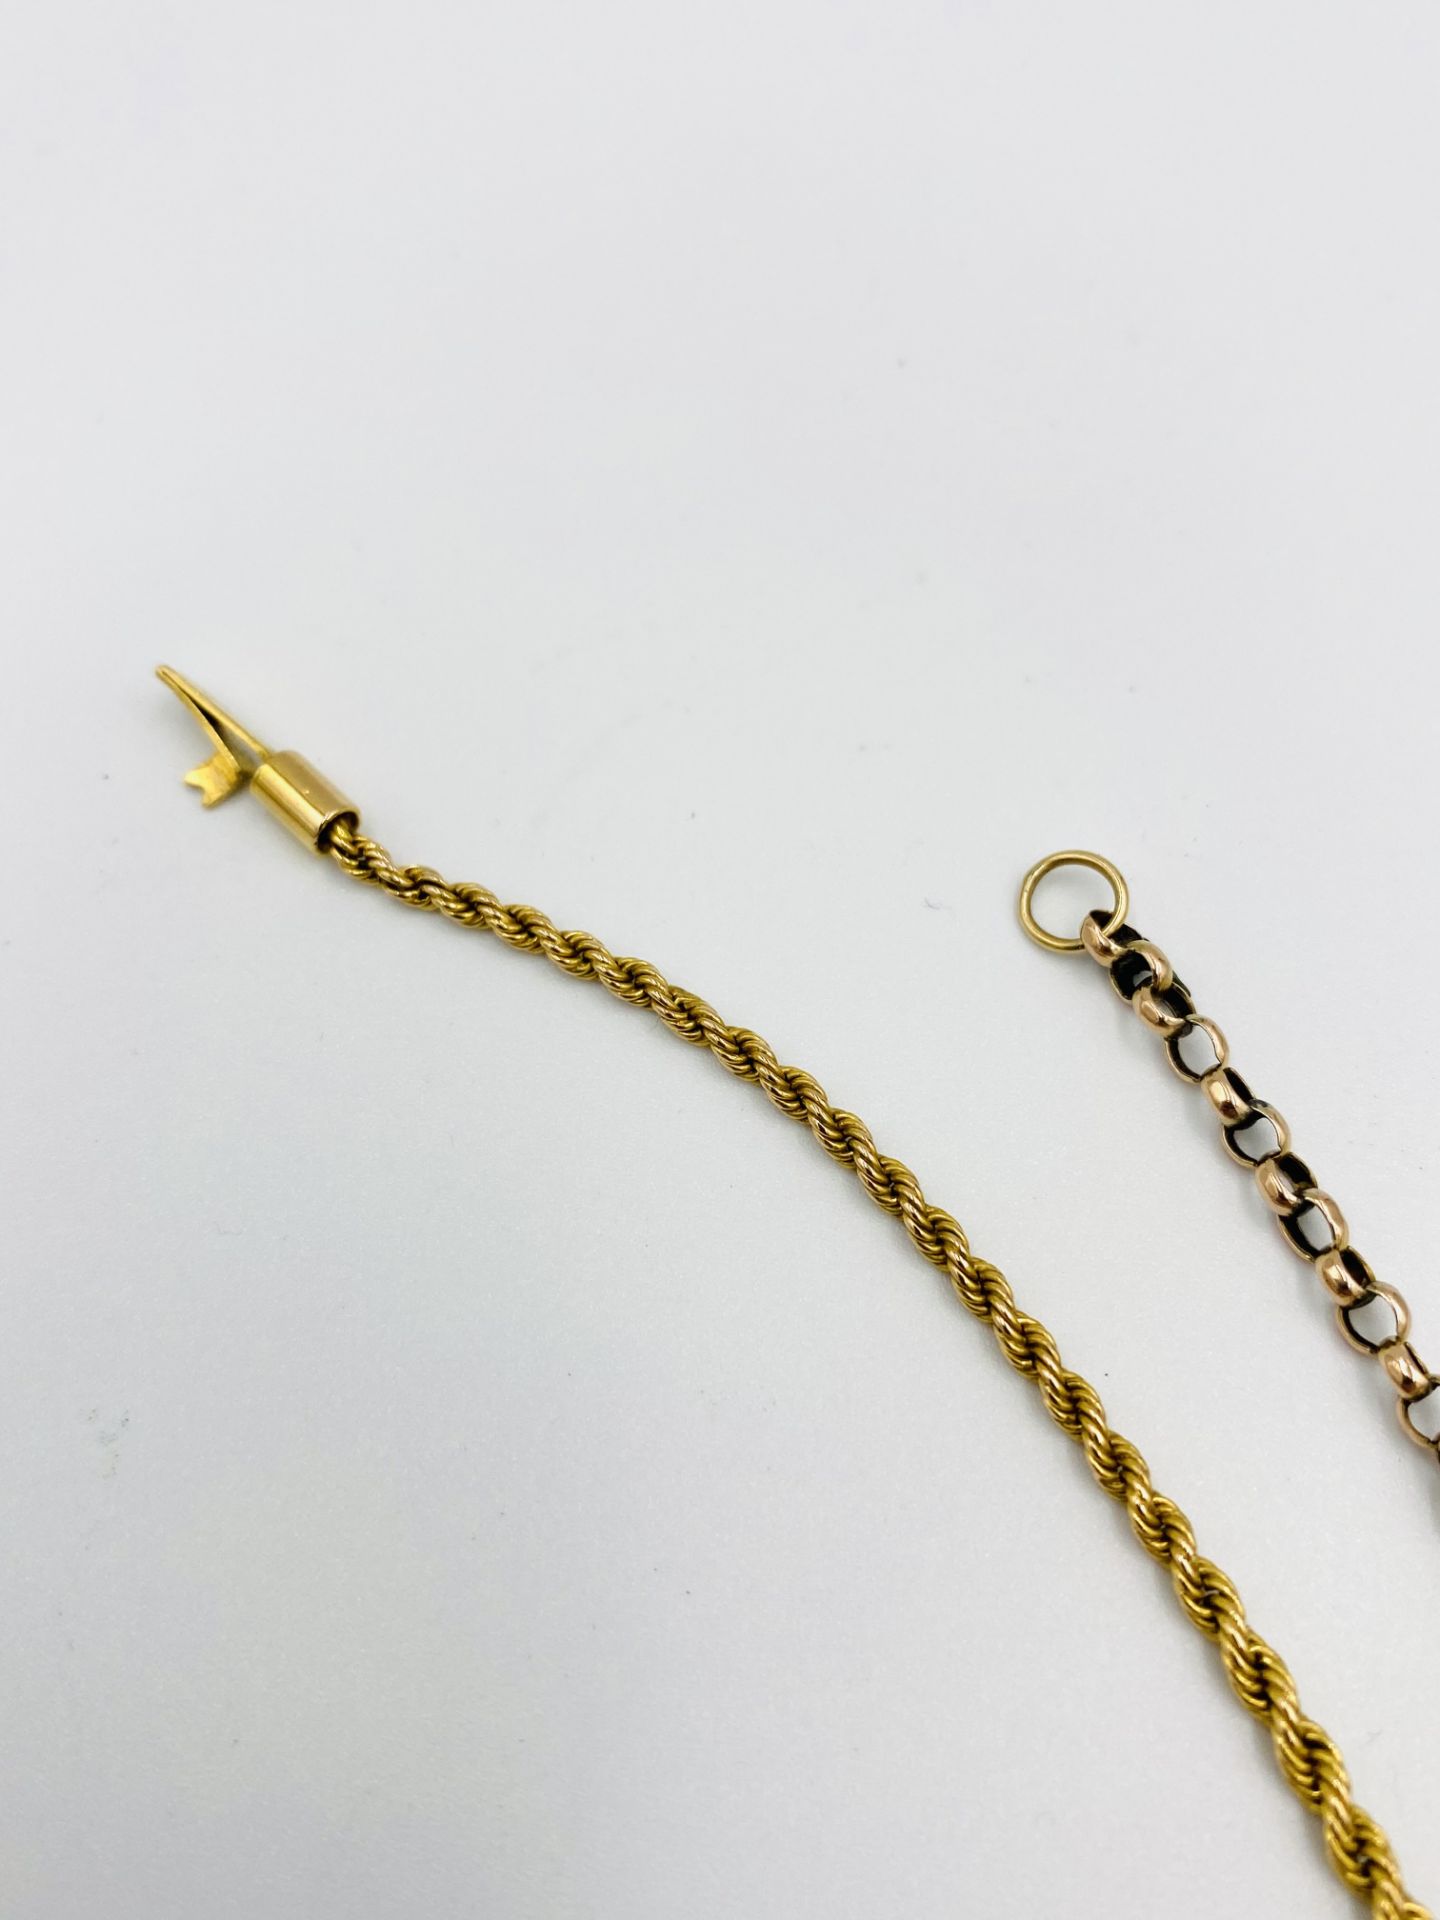 9ct gold link chain together with a gold plated rope twist chain - Image 4 of 6